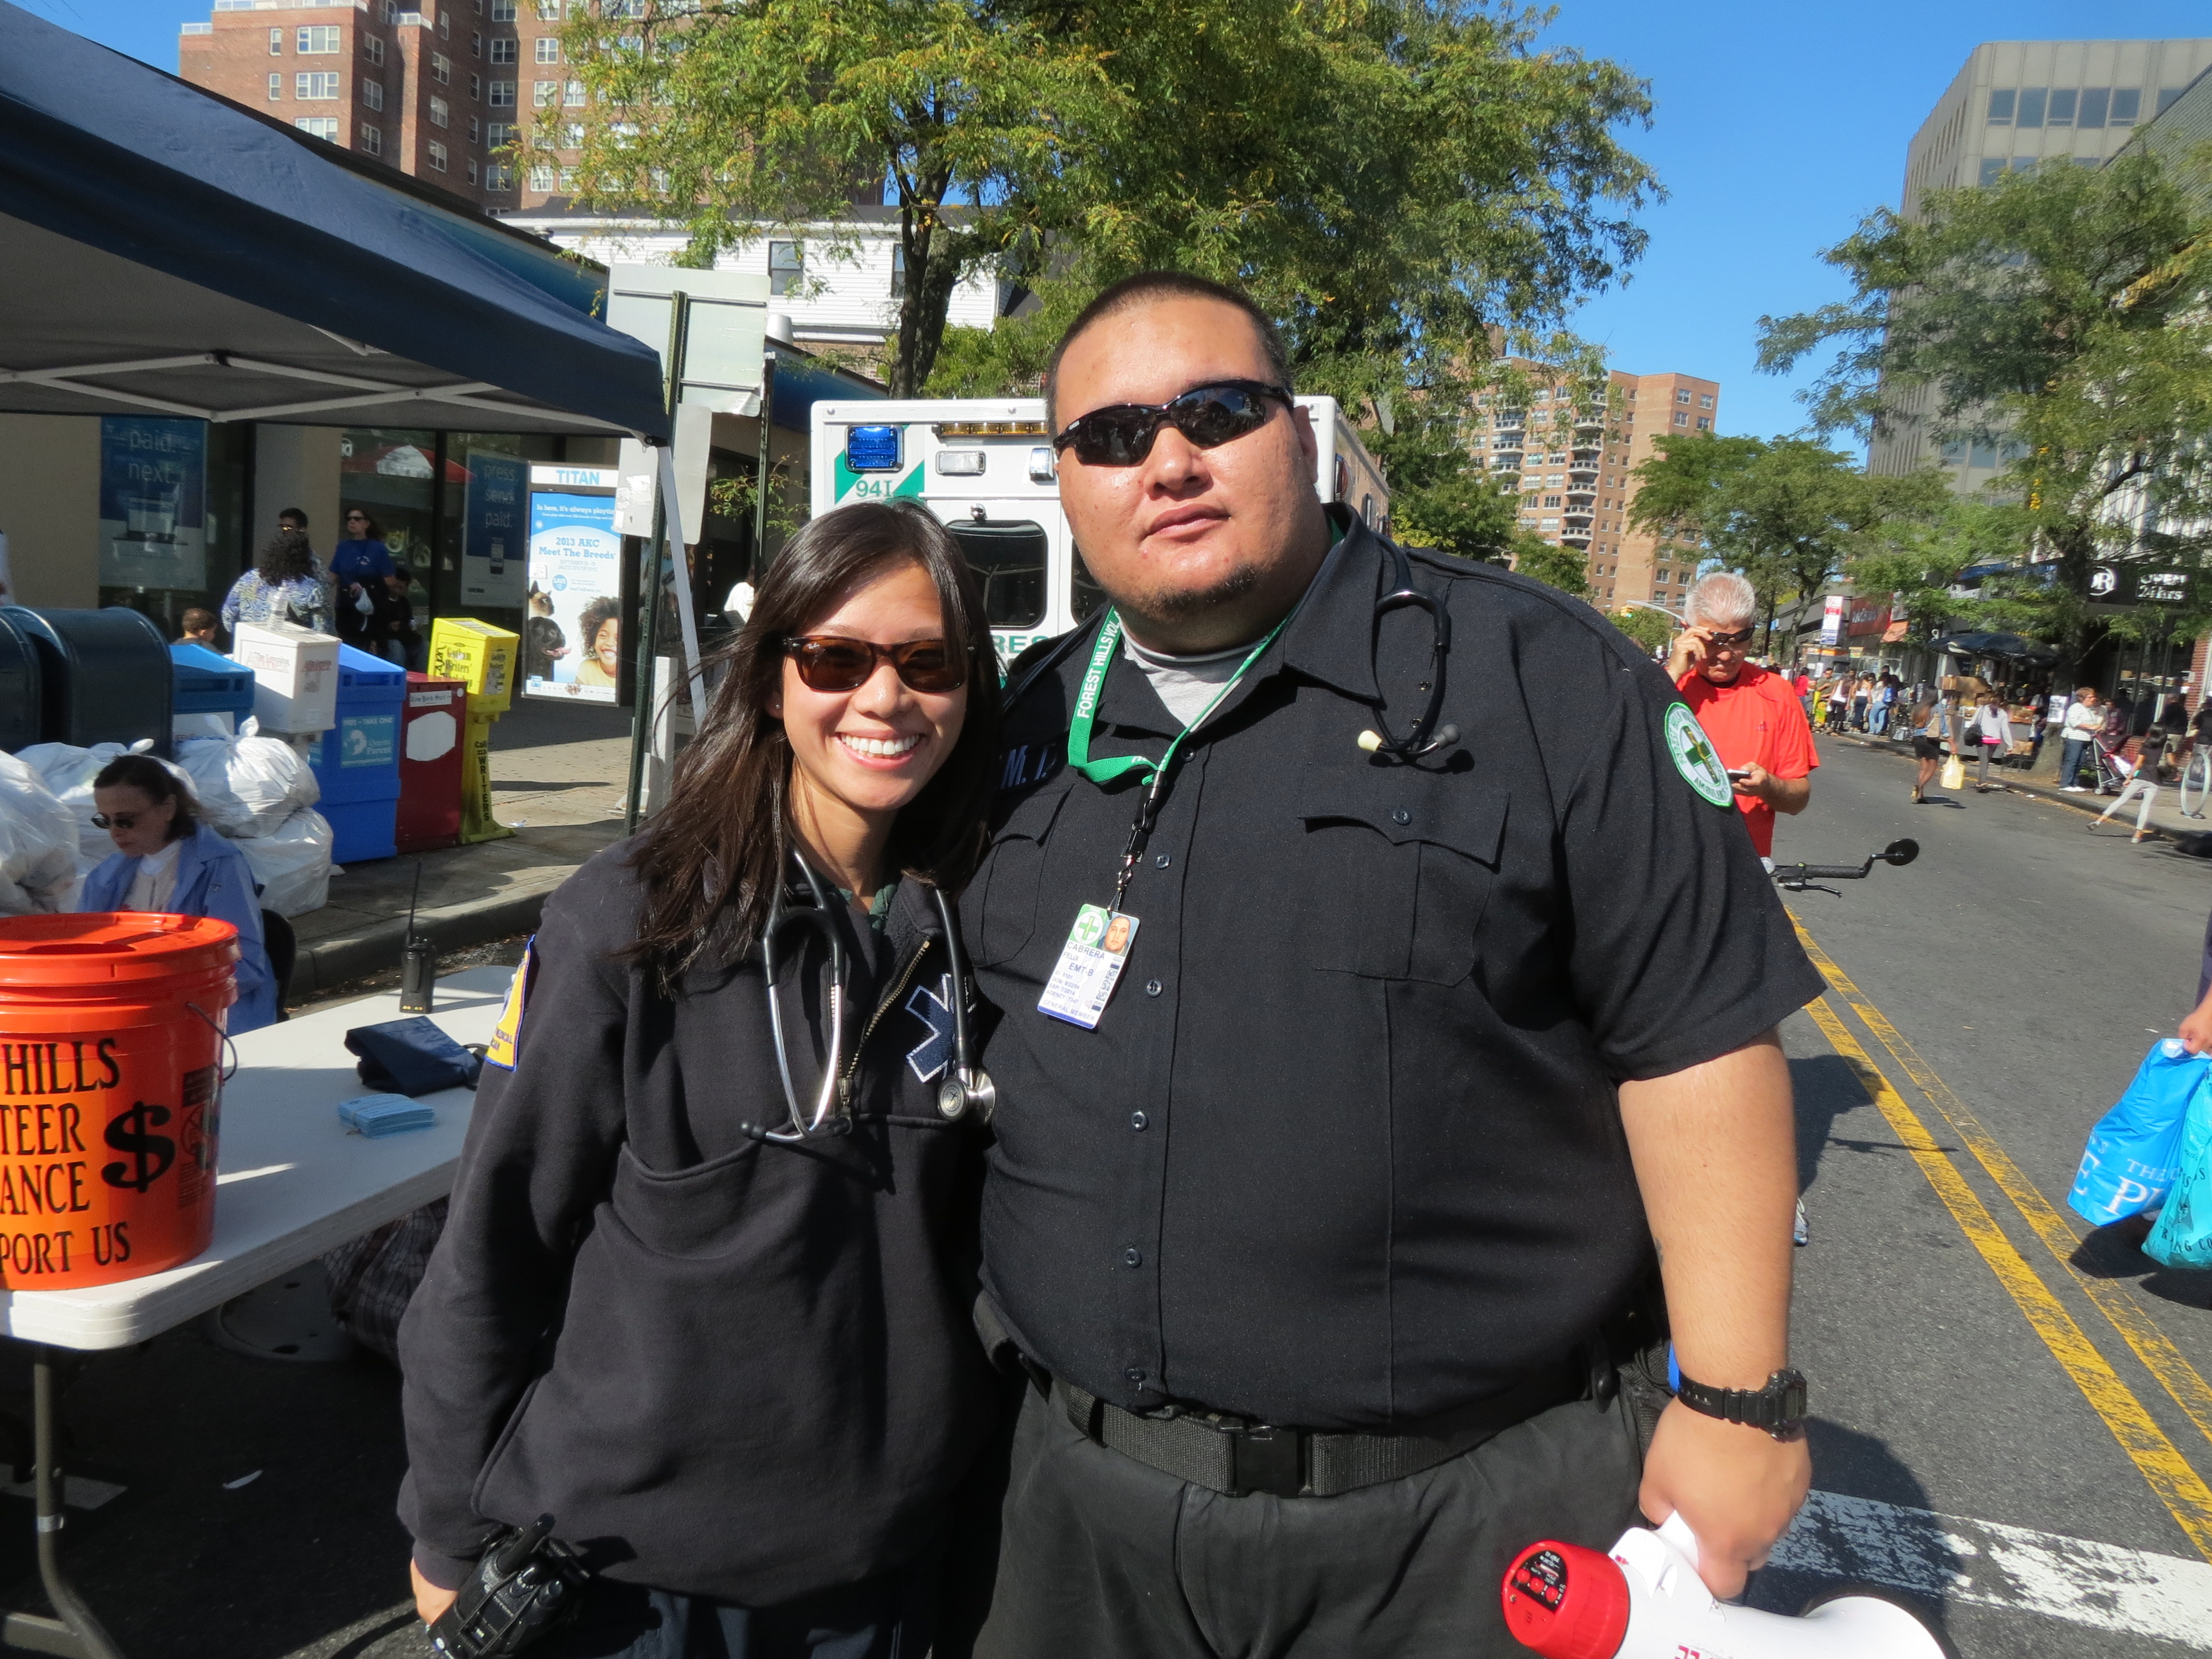 Forest Hills Volunteer Ambulance Corps volunteer EMTs Jun Xiao, left, and Felix Cabrera spoke to festival attendees about FHVAC, which has served Forest Hills since 1971 and Rego Park since 1997.